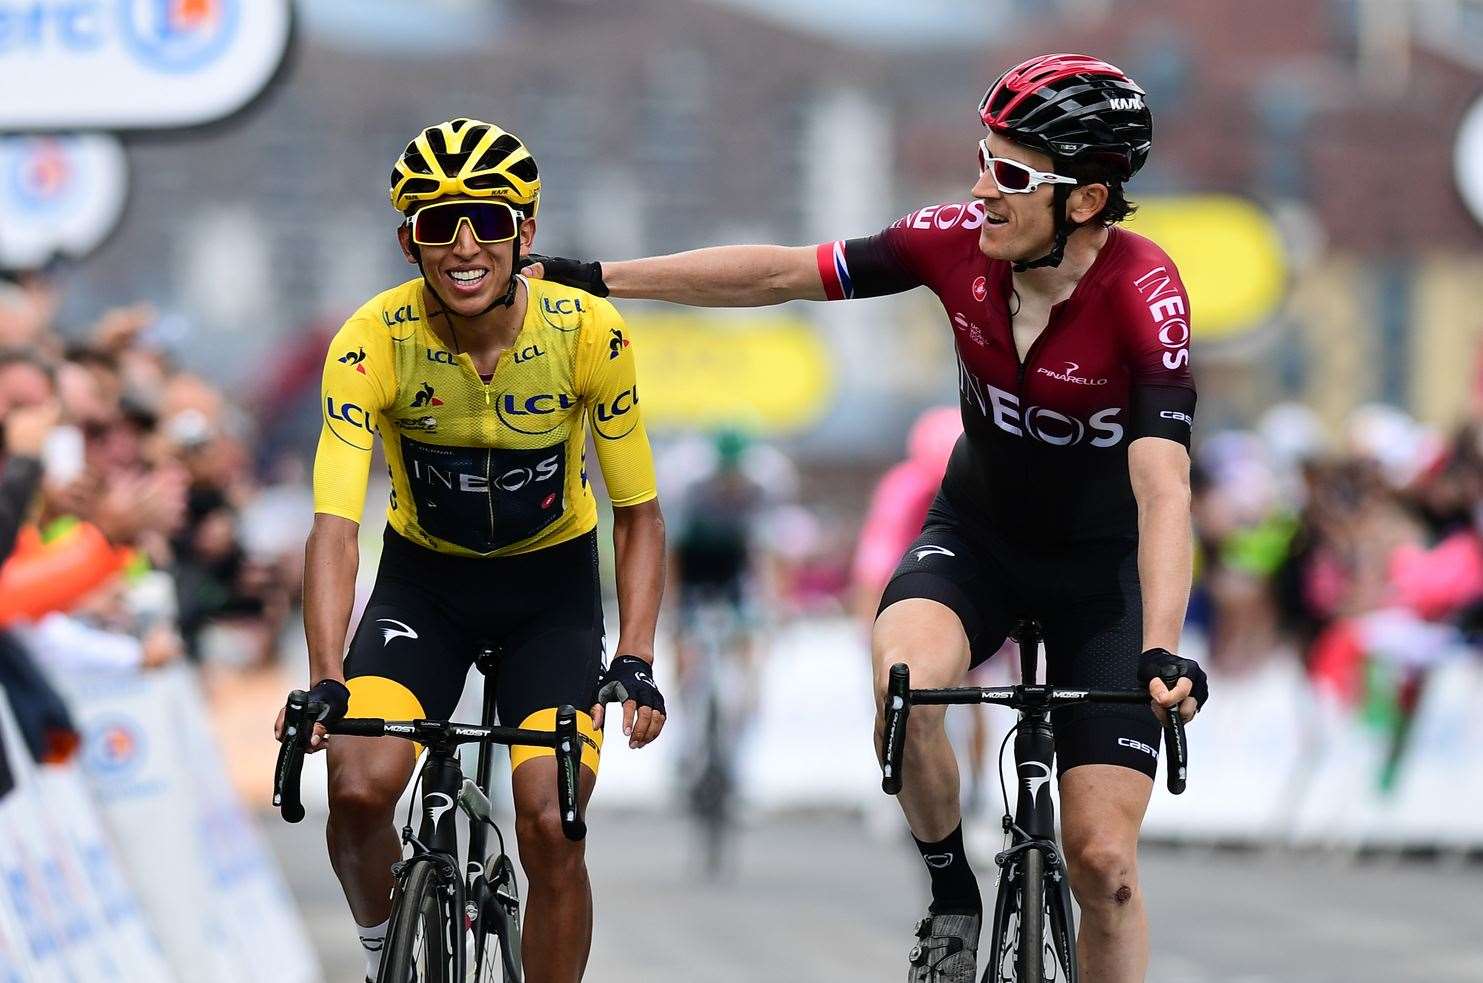 Coverage of the Tour de France will be filmed here in Kent. Picture: ASO / Alex Broadway